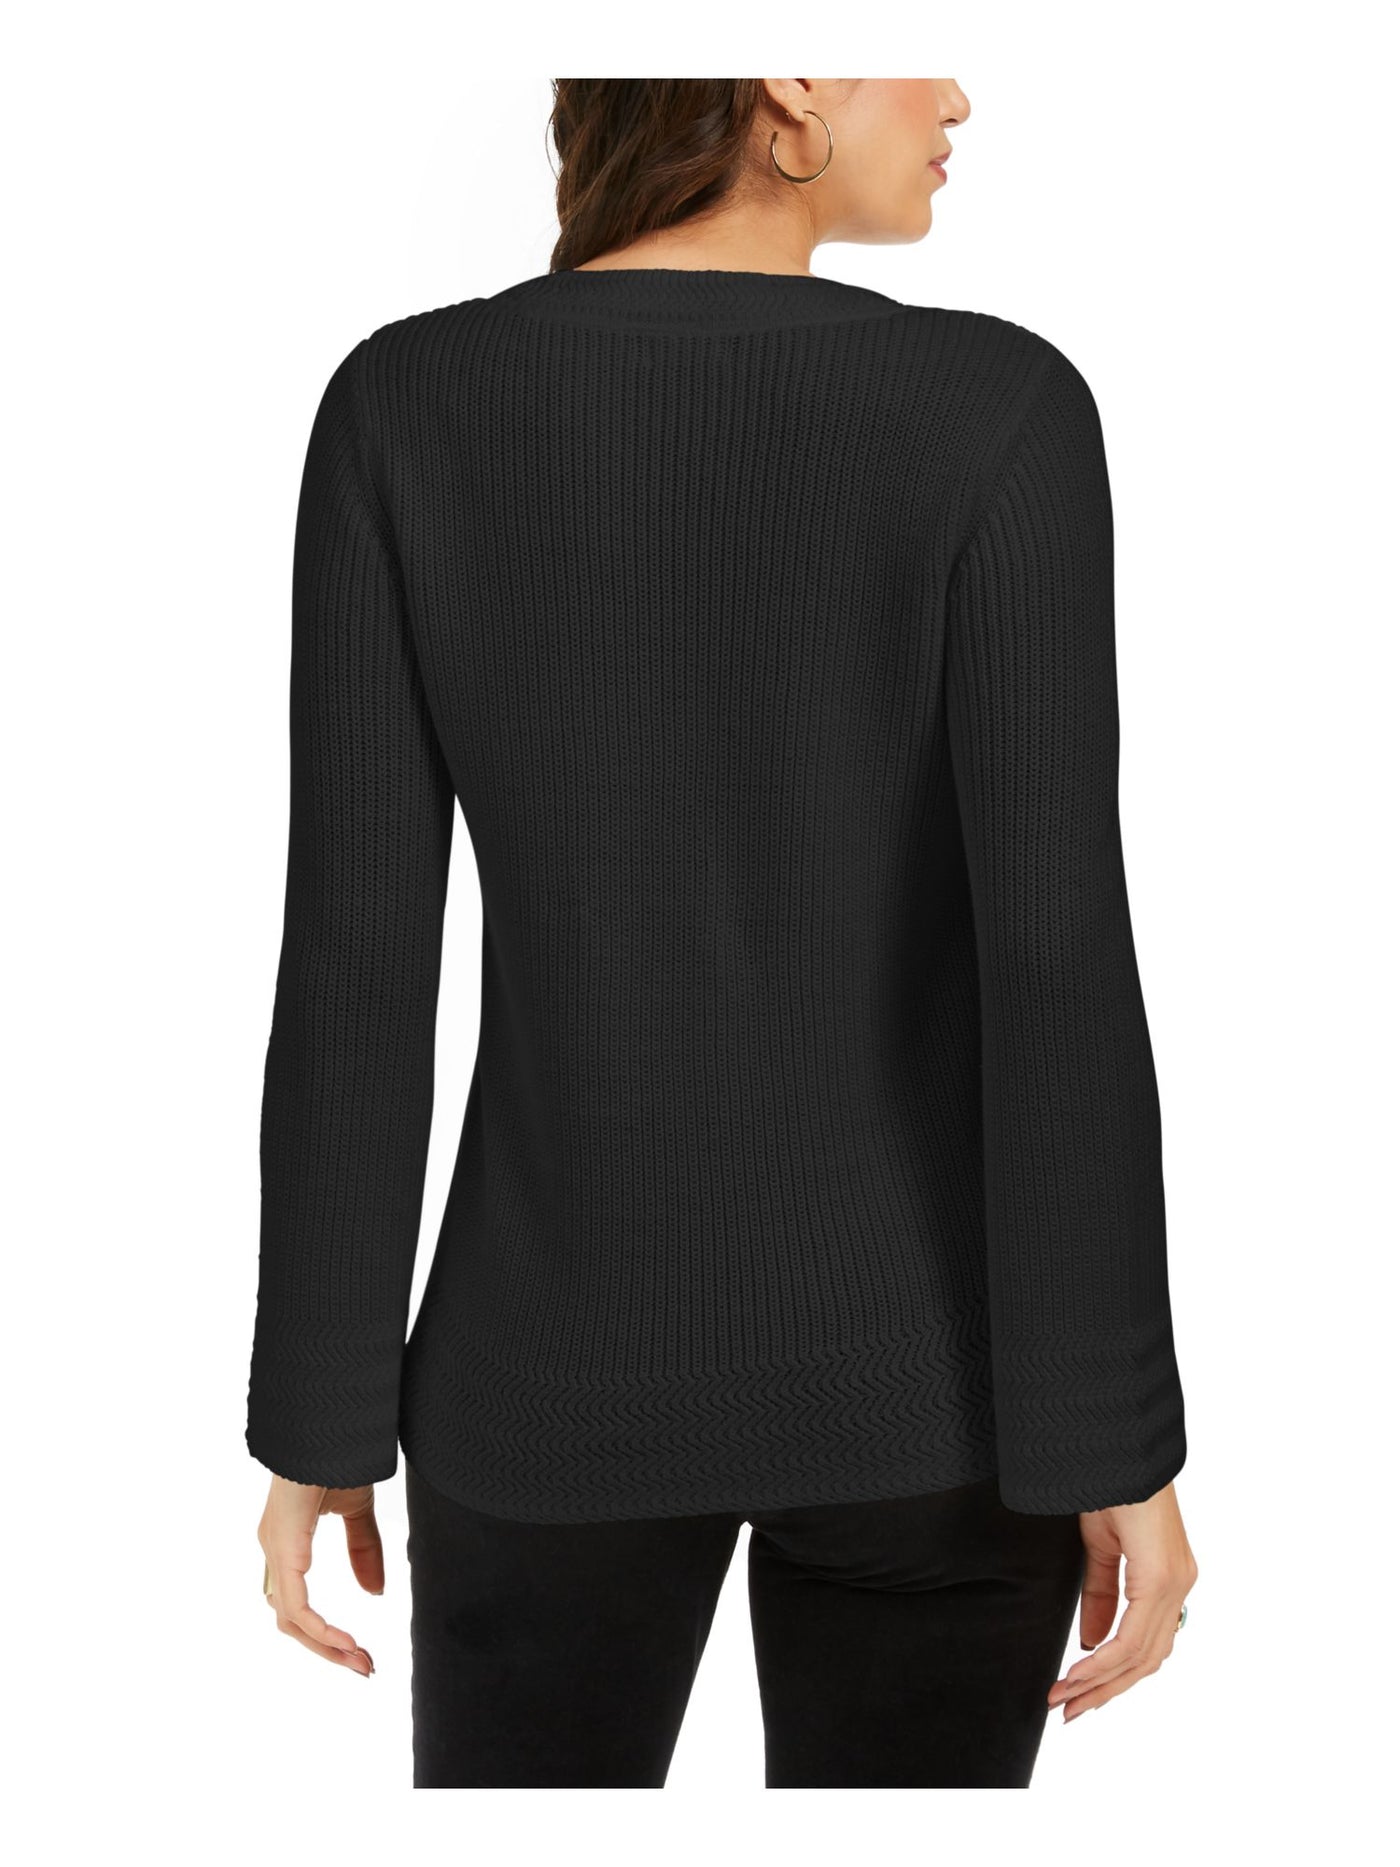 STYLE & COMPANY Womens Black Long Sleeve Scoop Neck Sweater Petites Size: PM